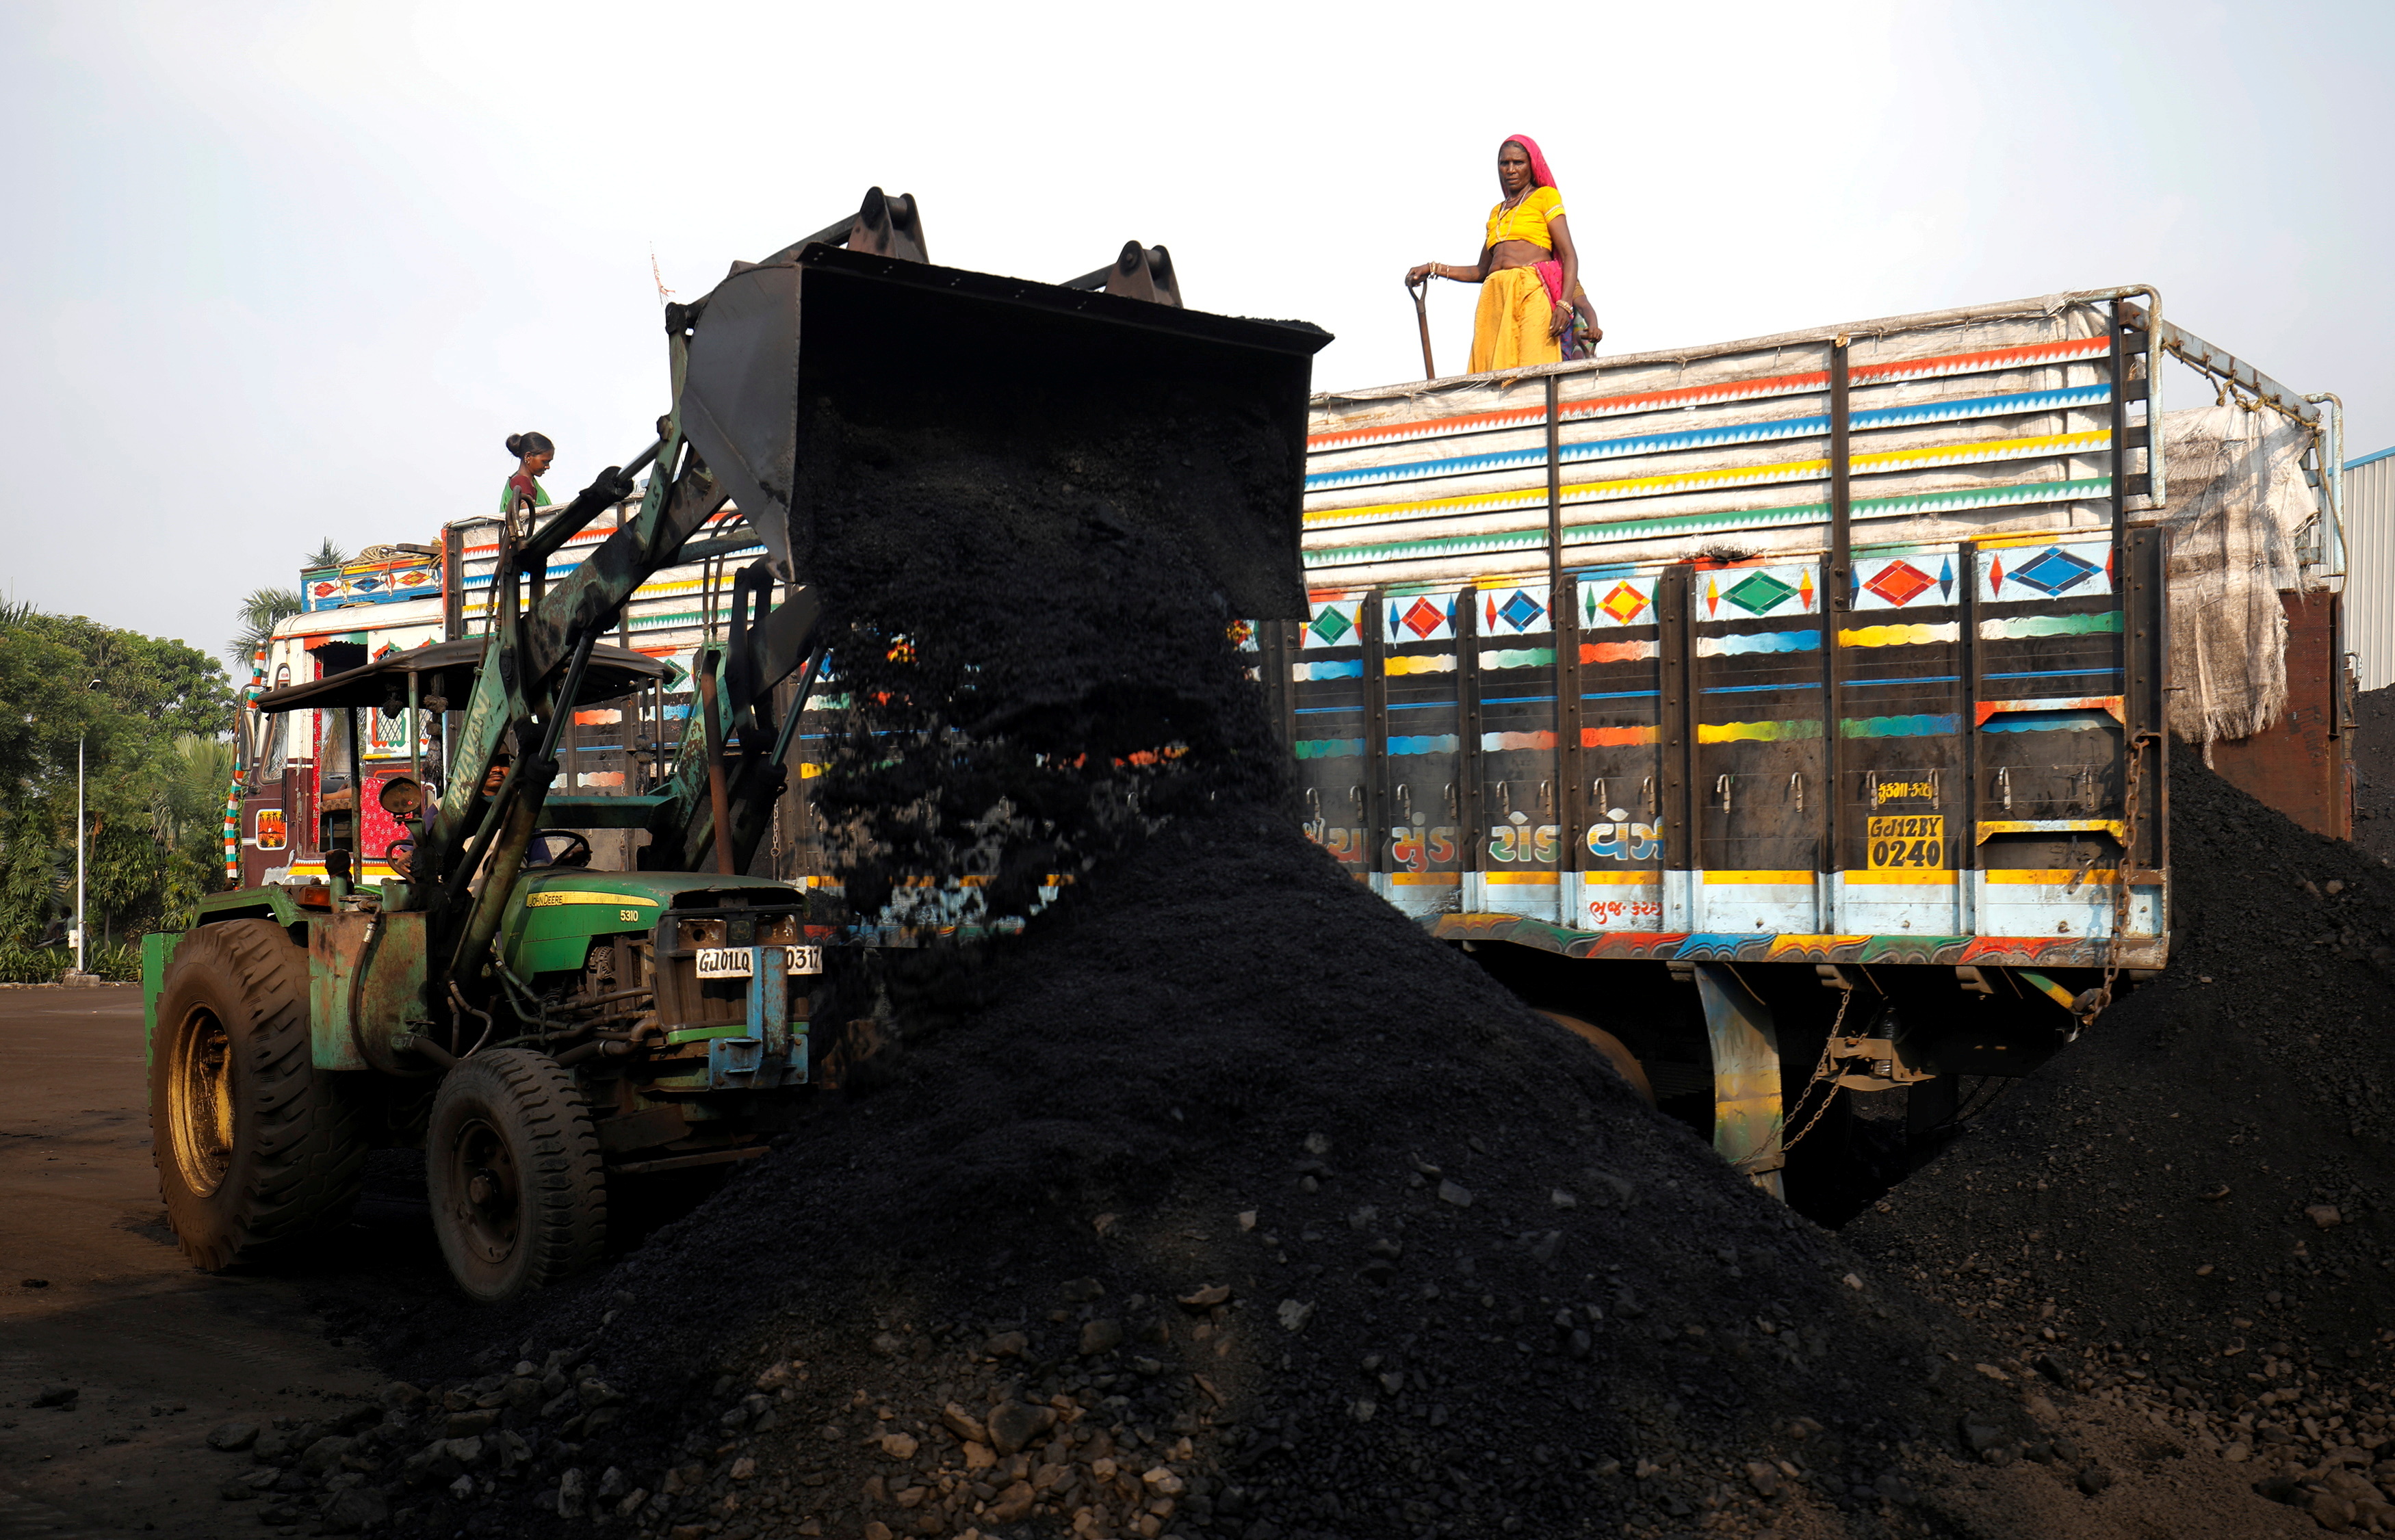 Workers unload coal from a supply truck at a yard on the outskirts of Ahmedabad, India October 12, 2021. REUTERS/Amit Dave/File Photo